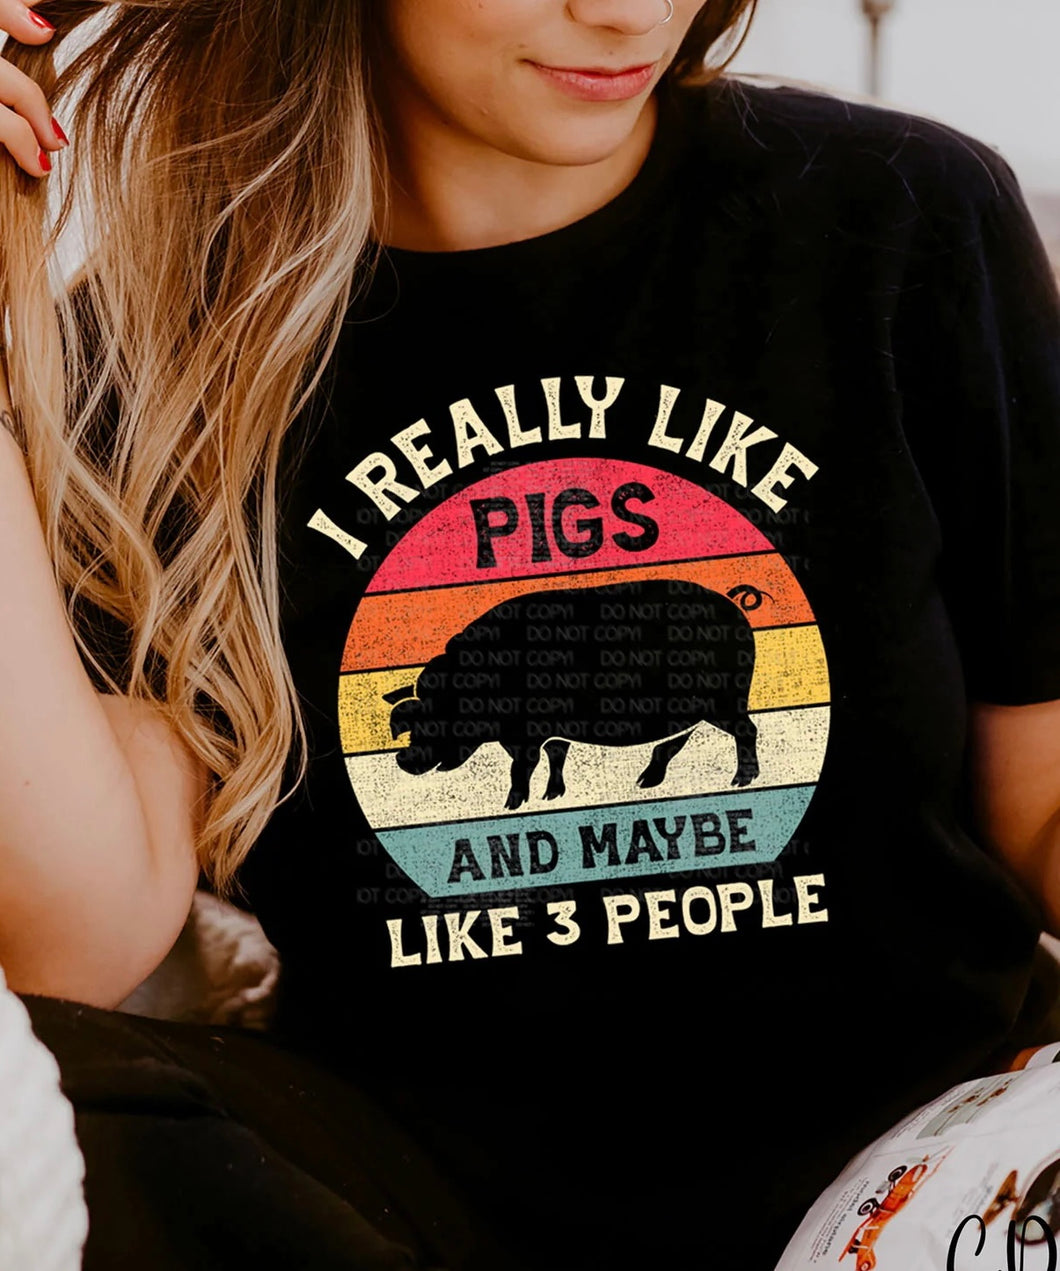 I really like pigs and maybe like 3 people